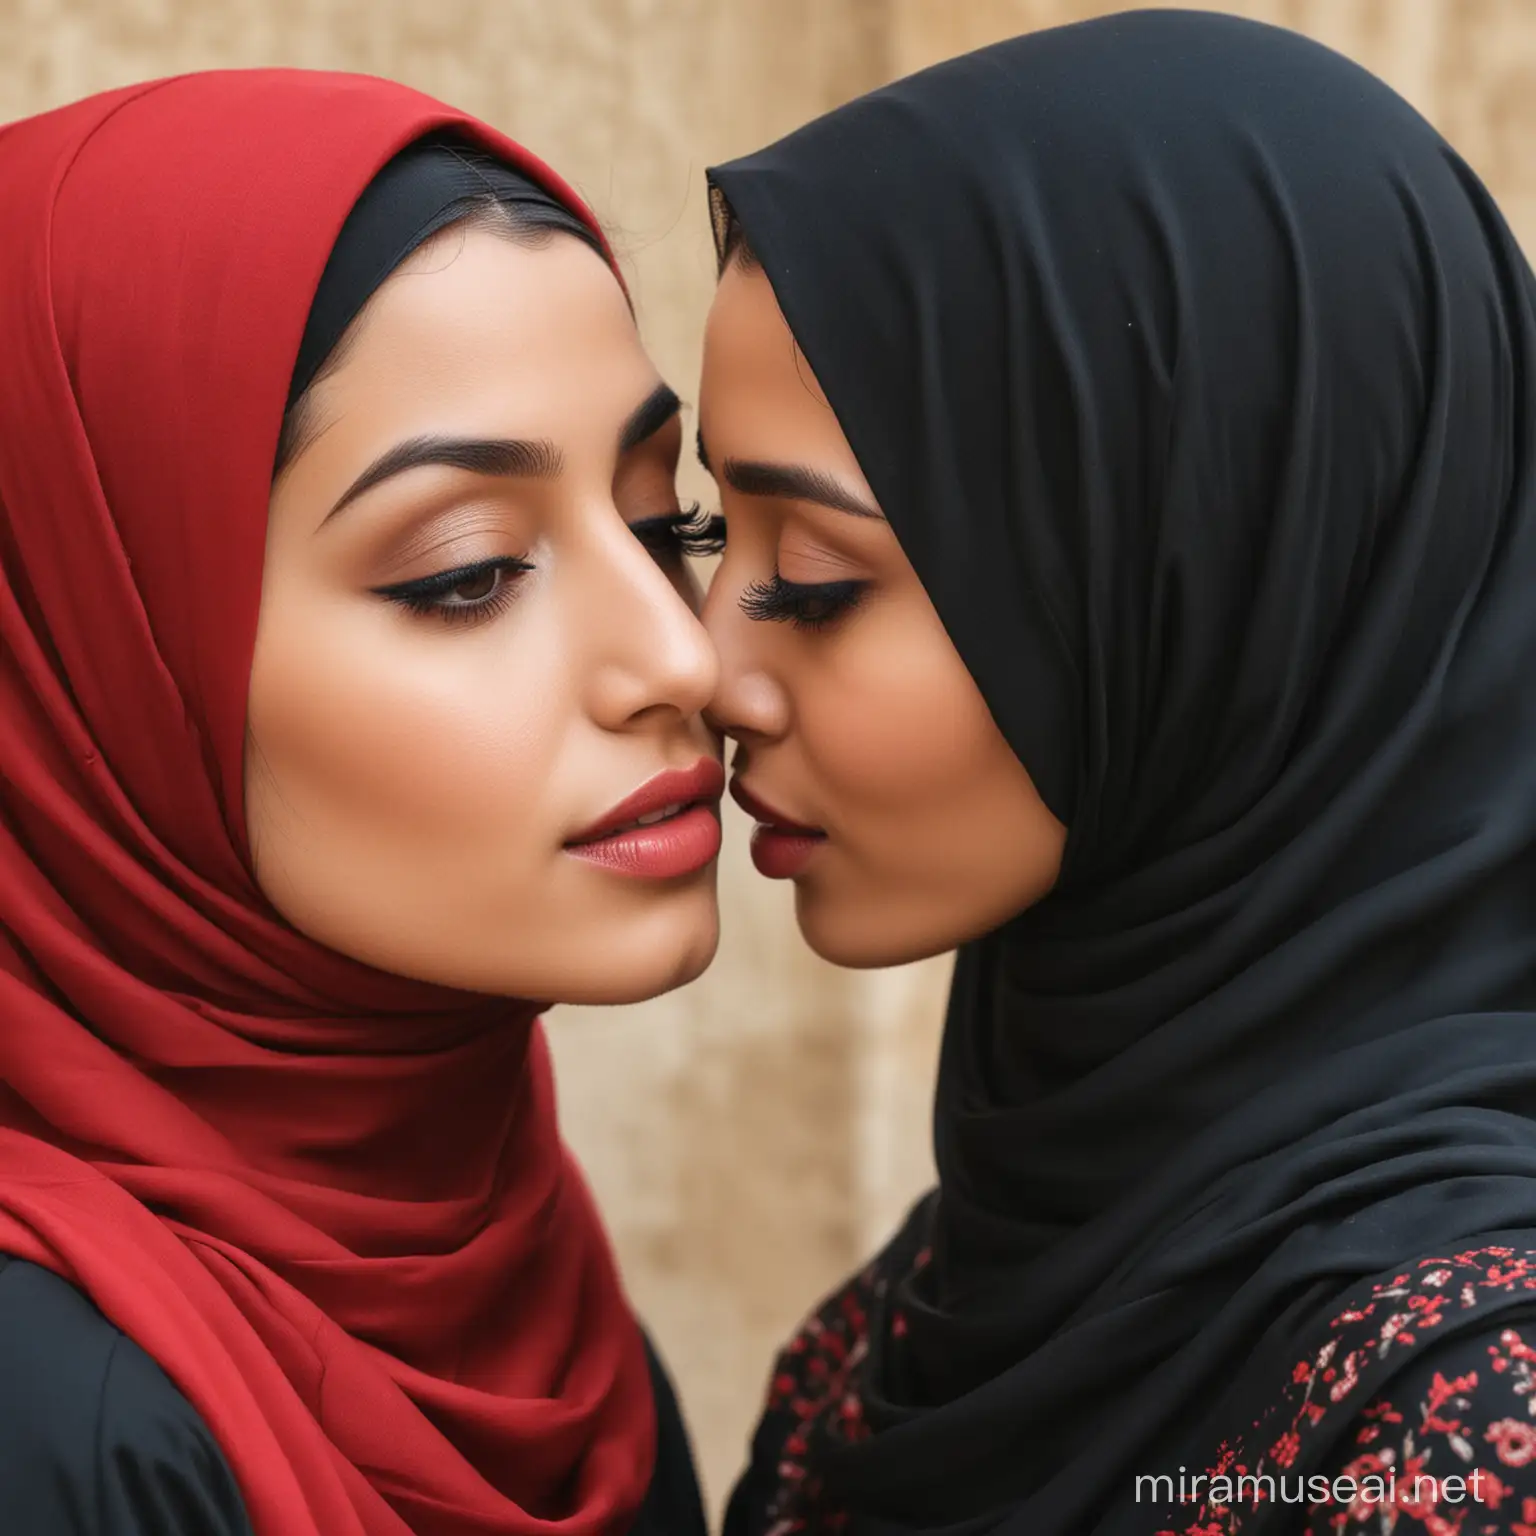 Beautiful Girls in Black and Red Hijabs Sharing a Kiss